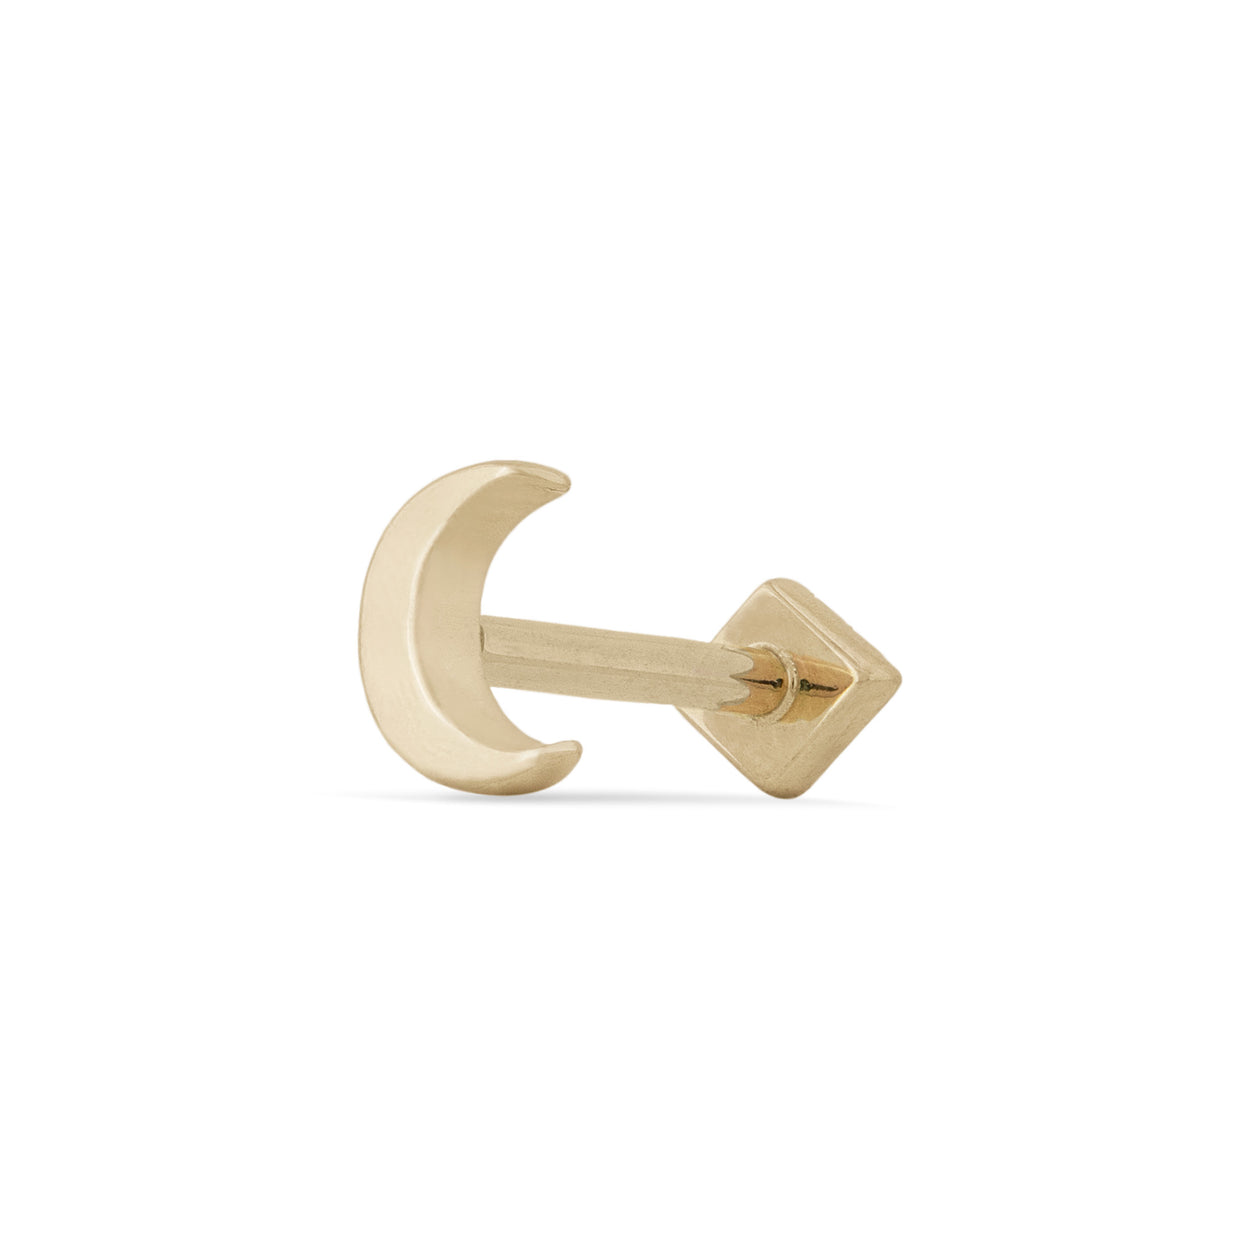 Gold Flat Earring Posts by Bead Landing™